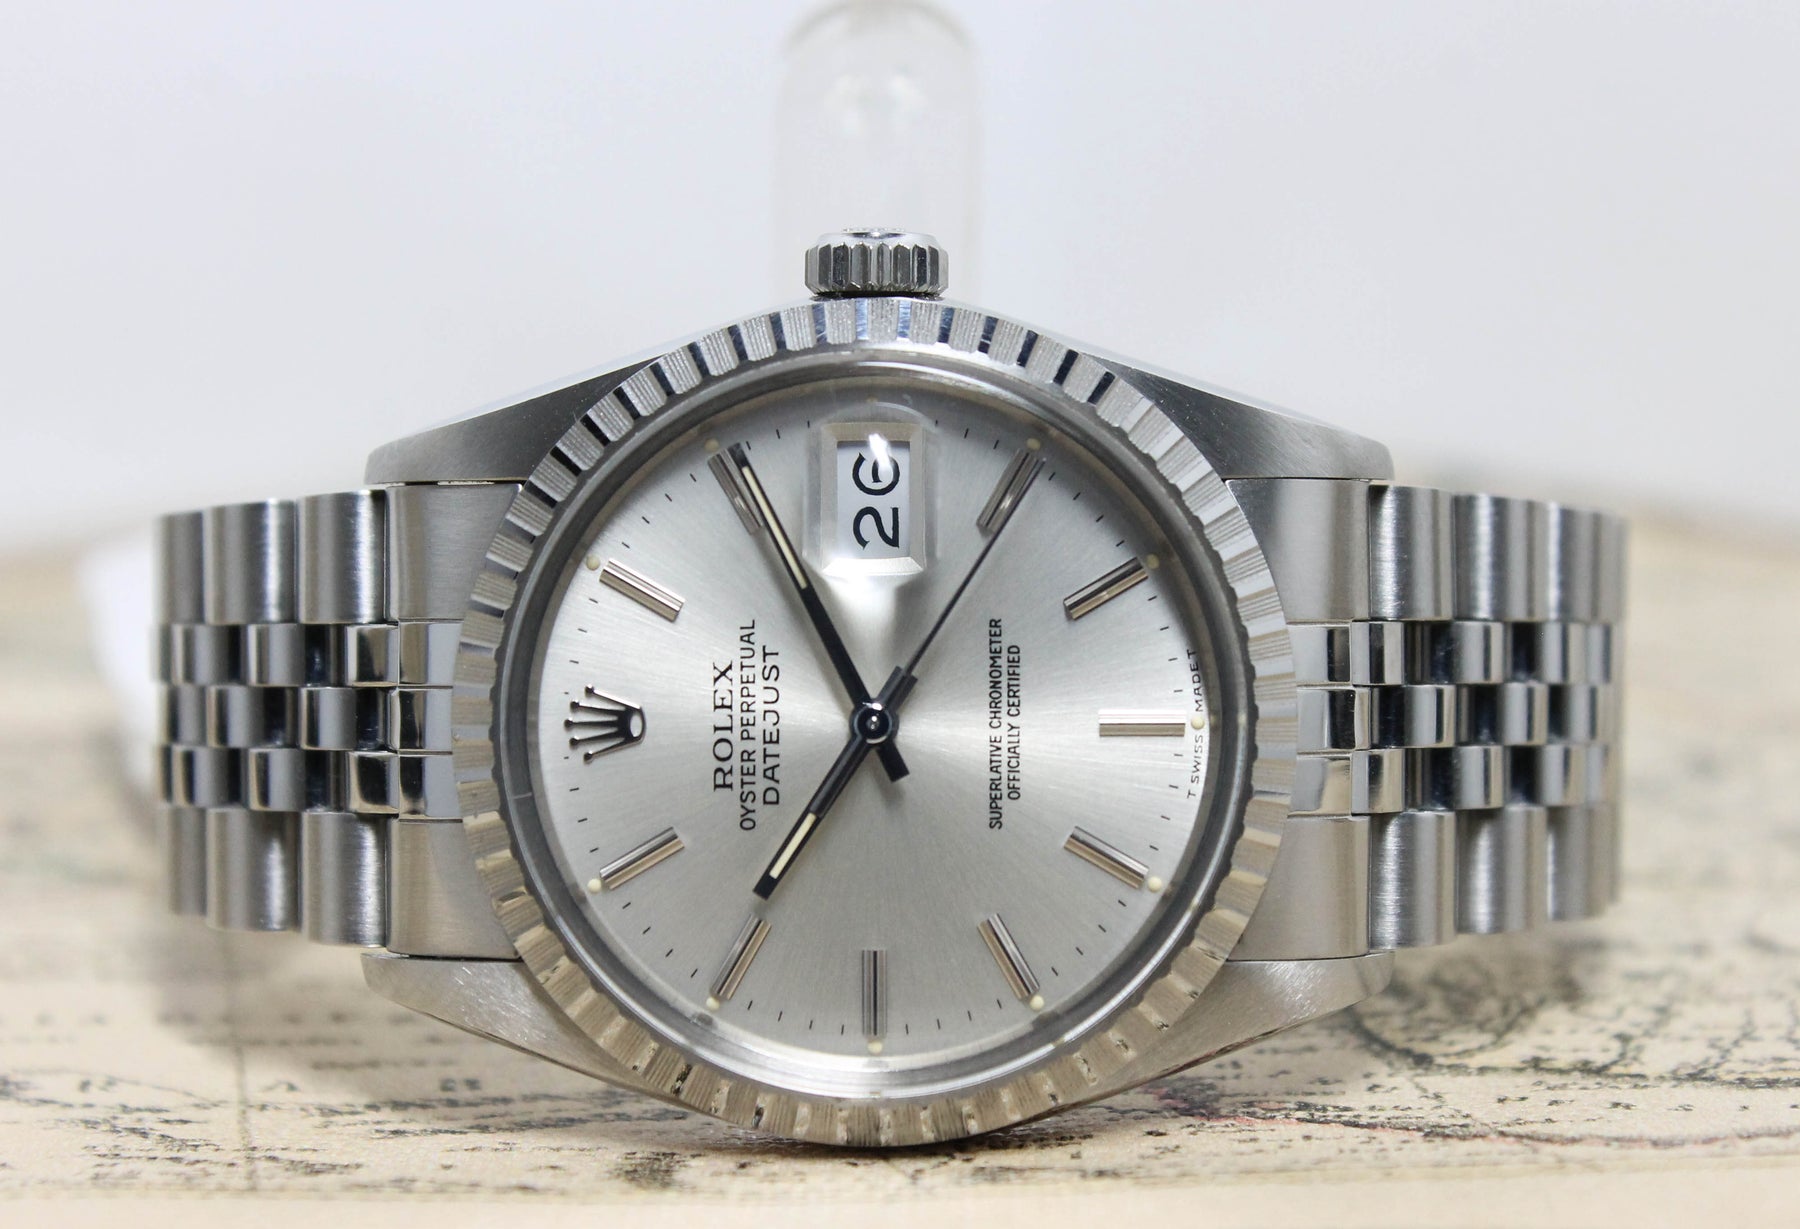 Rolex Datejust Ref. 16030 Year 1987 (with Papers)